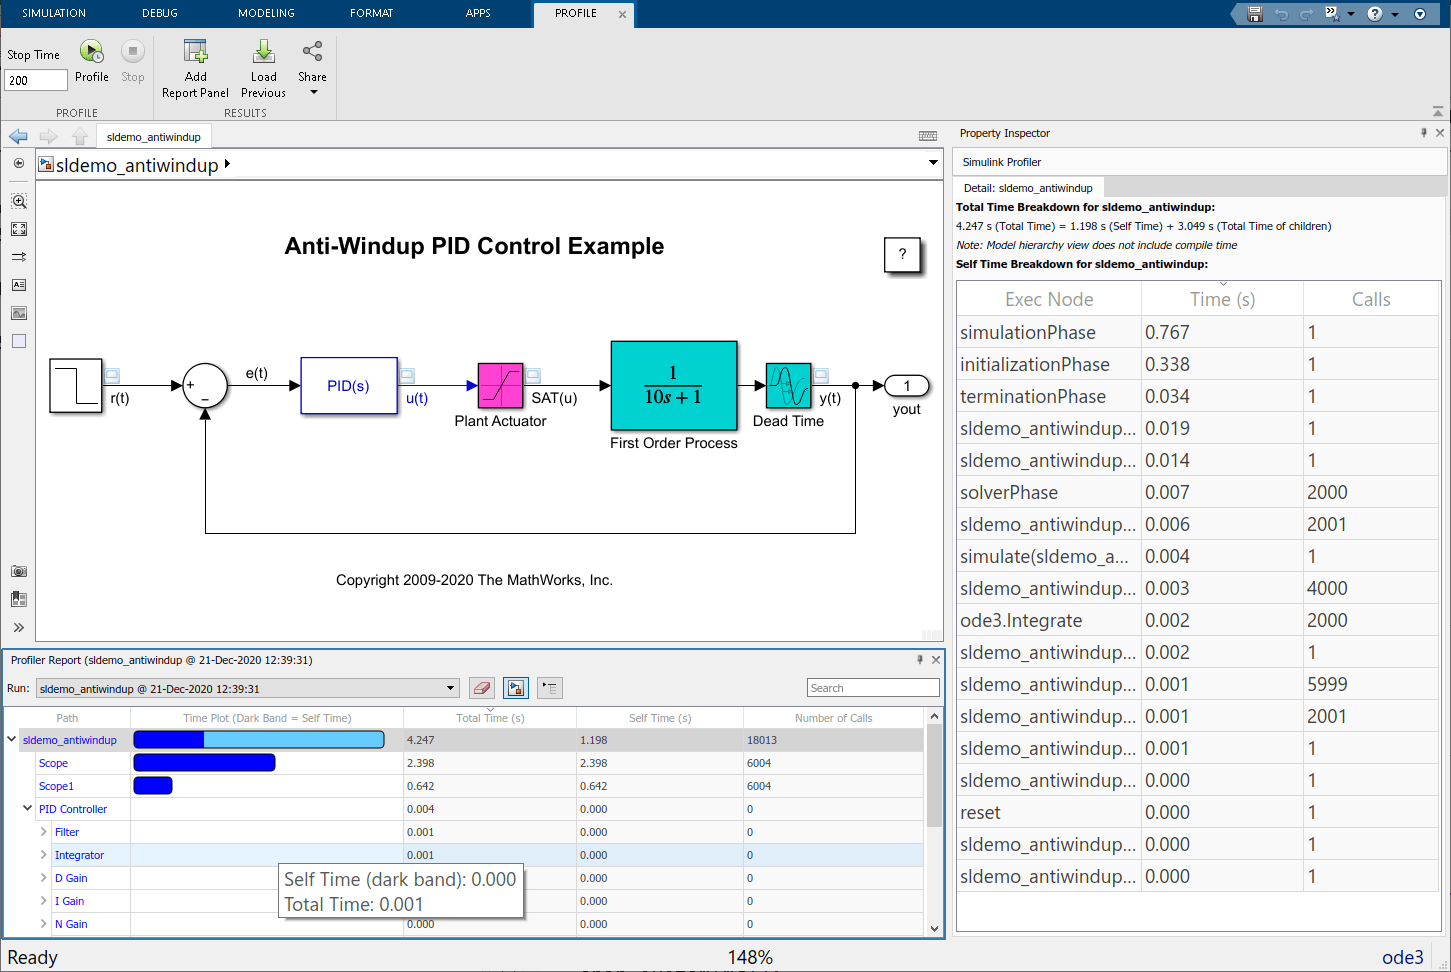 Model with Profiler report